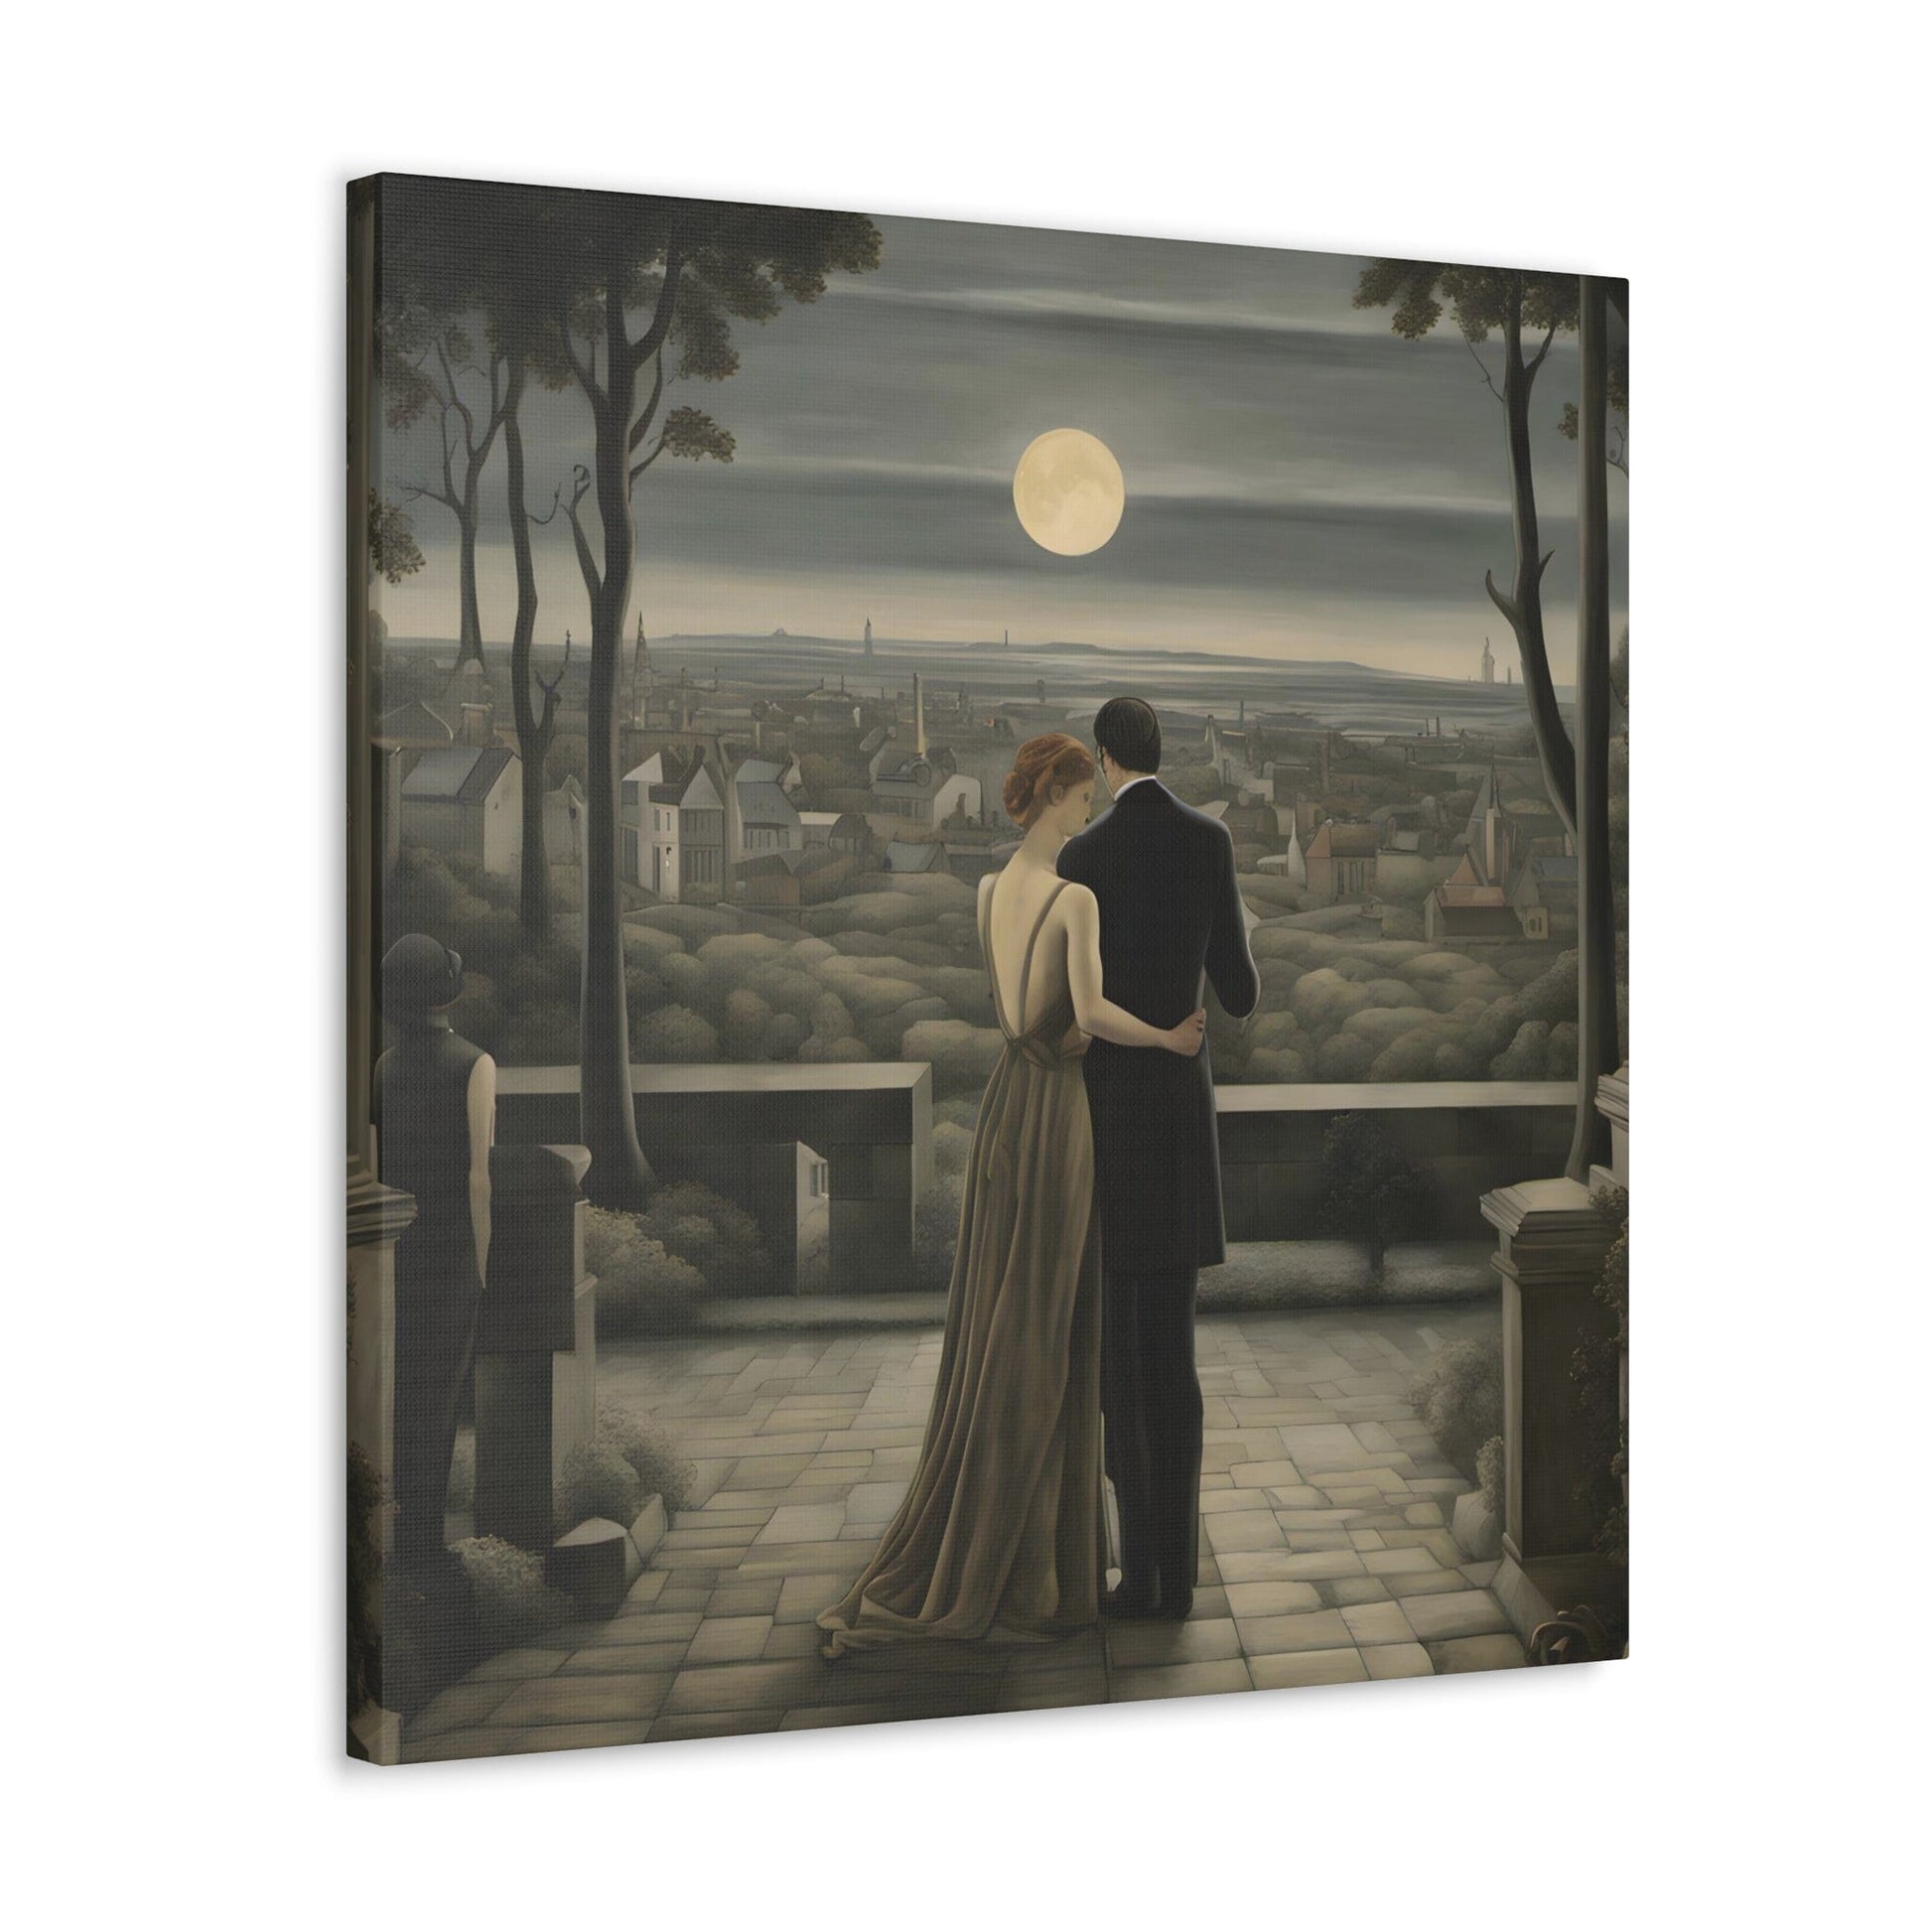 Leon Dufour. Whispers at Dusk. Exclusive Canvas Graphic Print